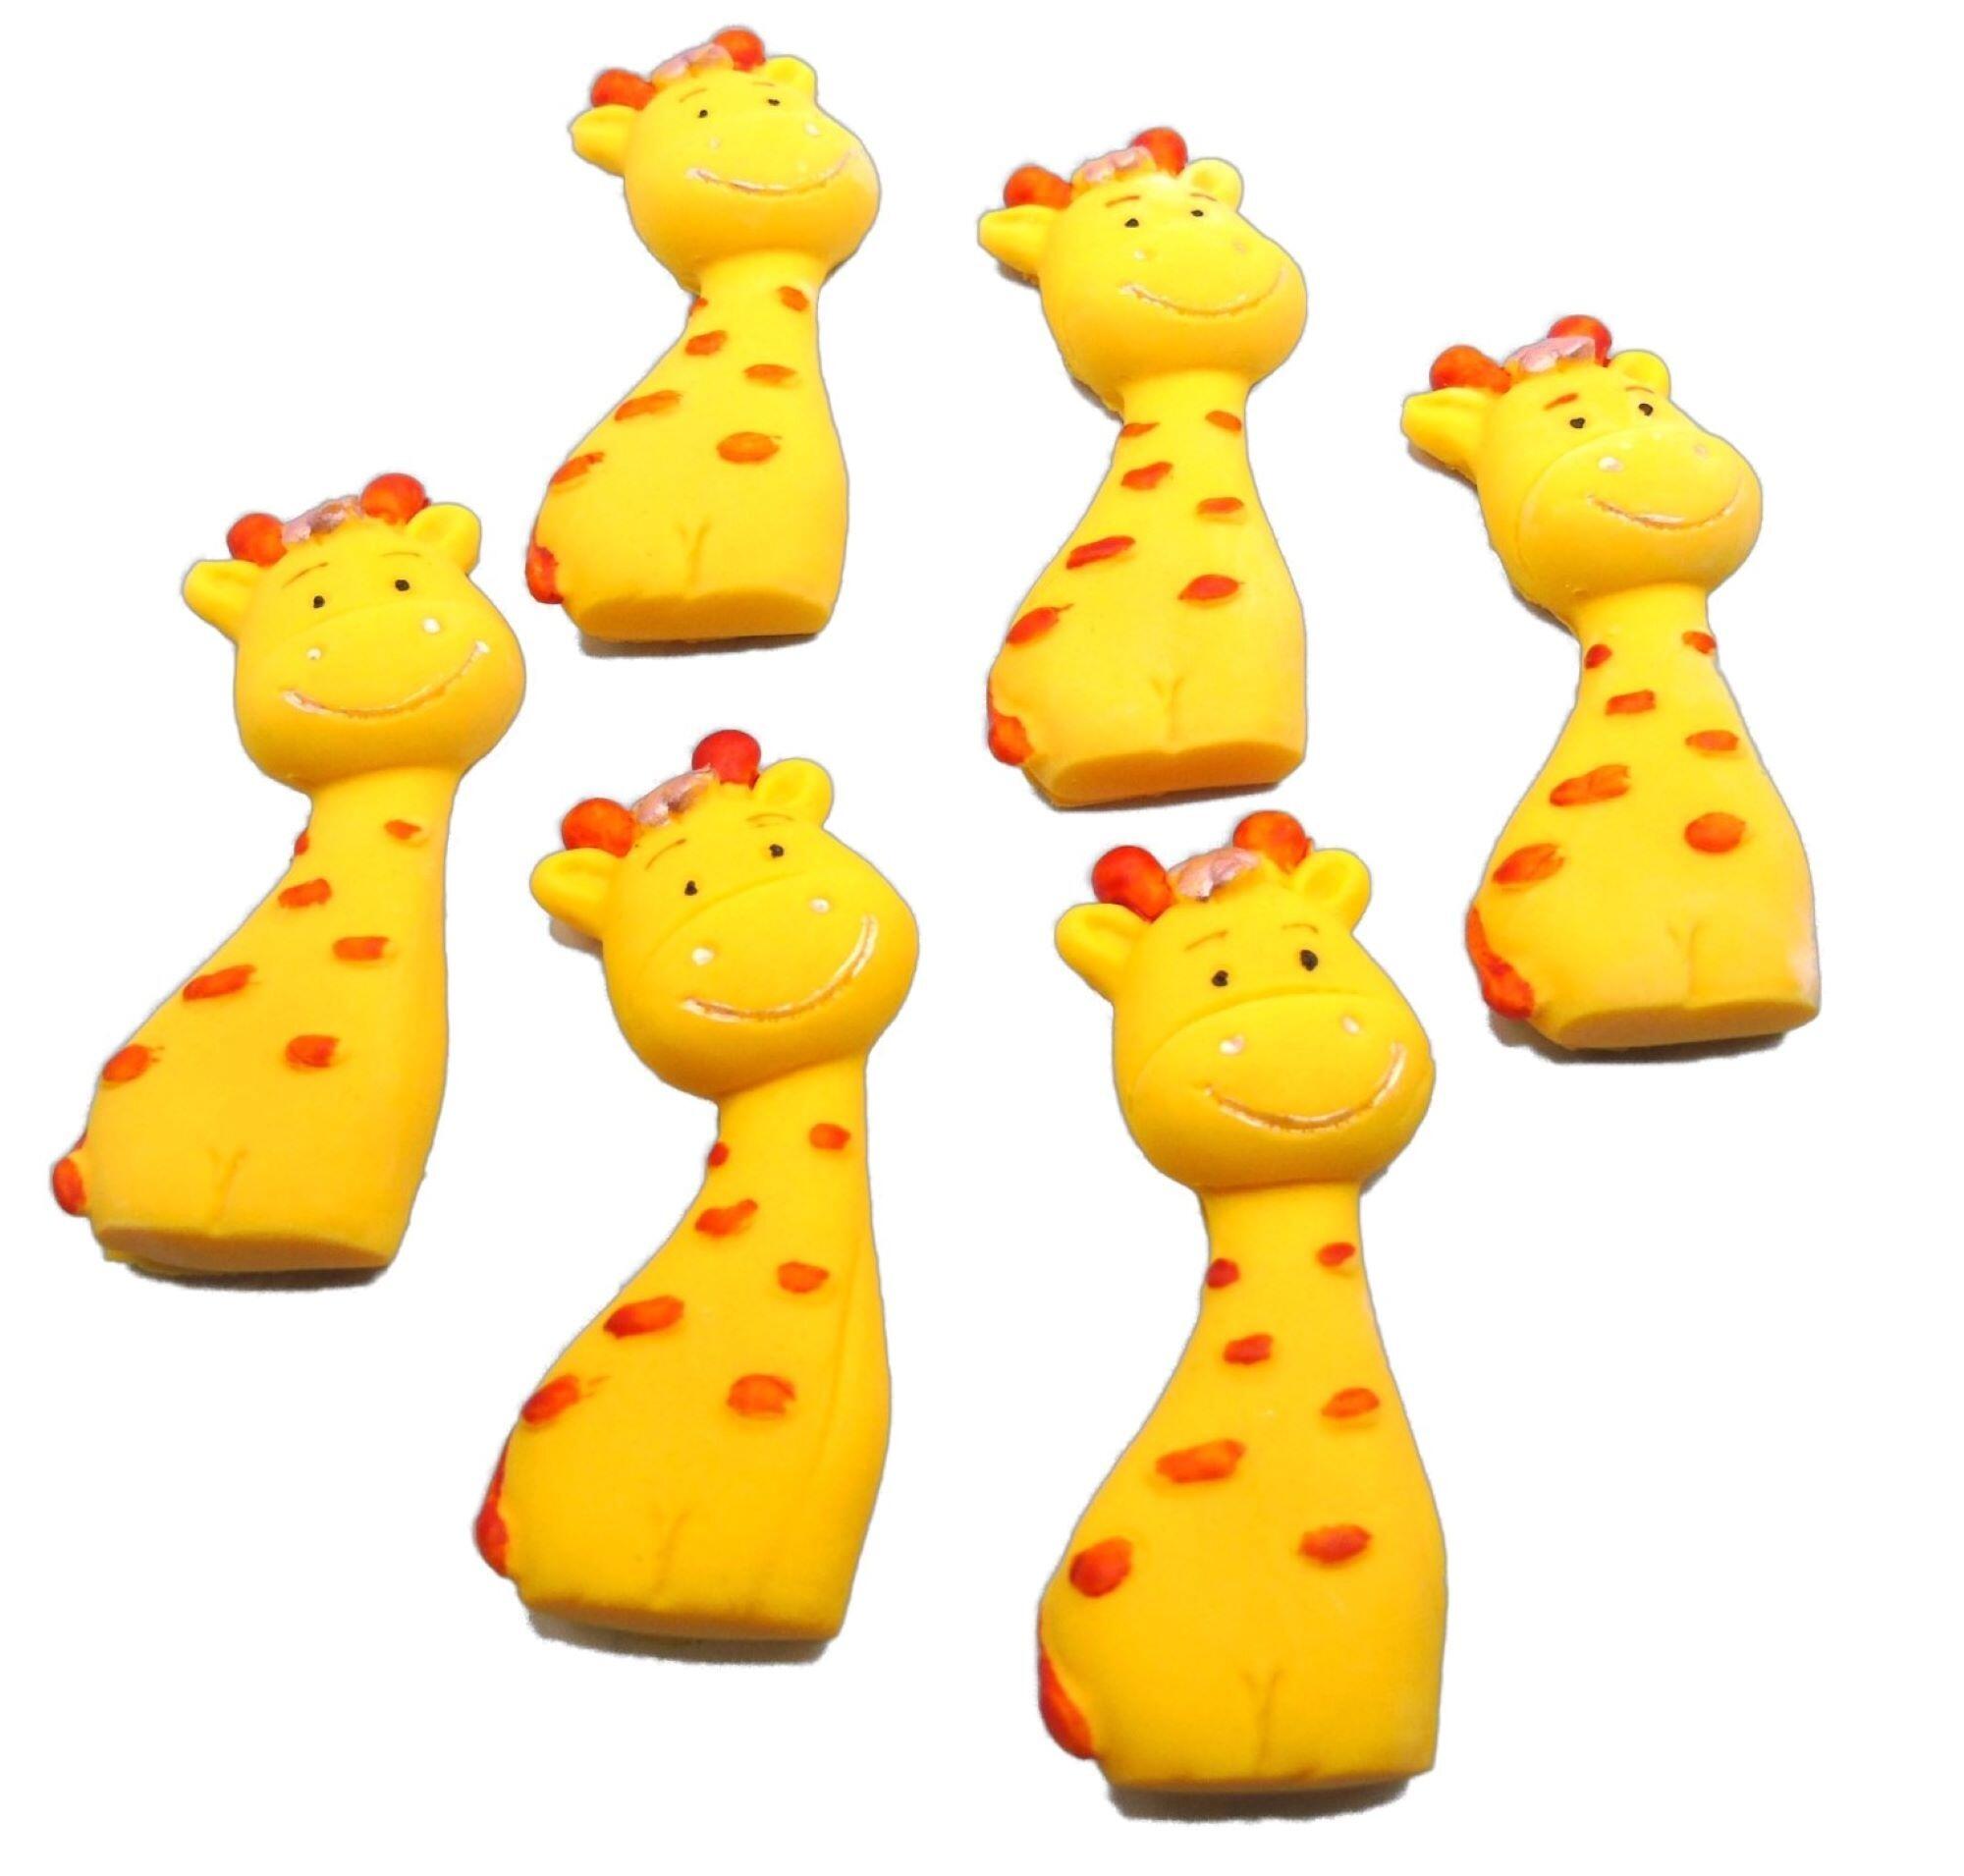 Set 6 Upright Giraffe Edible Cupcake Toppers Cake Decorations